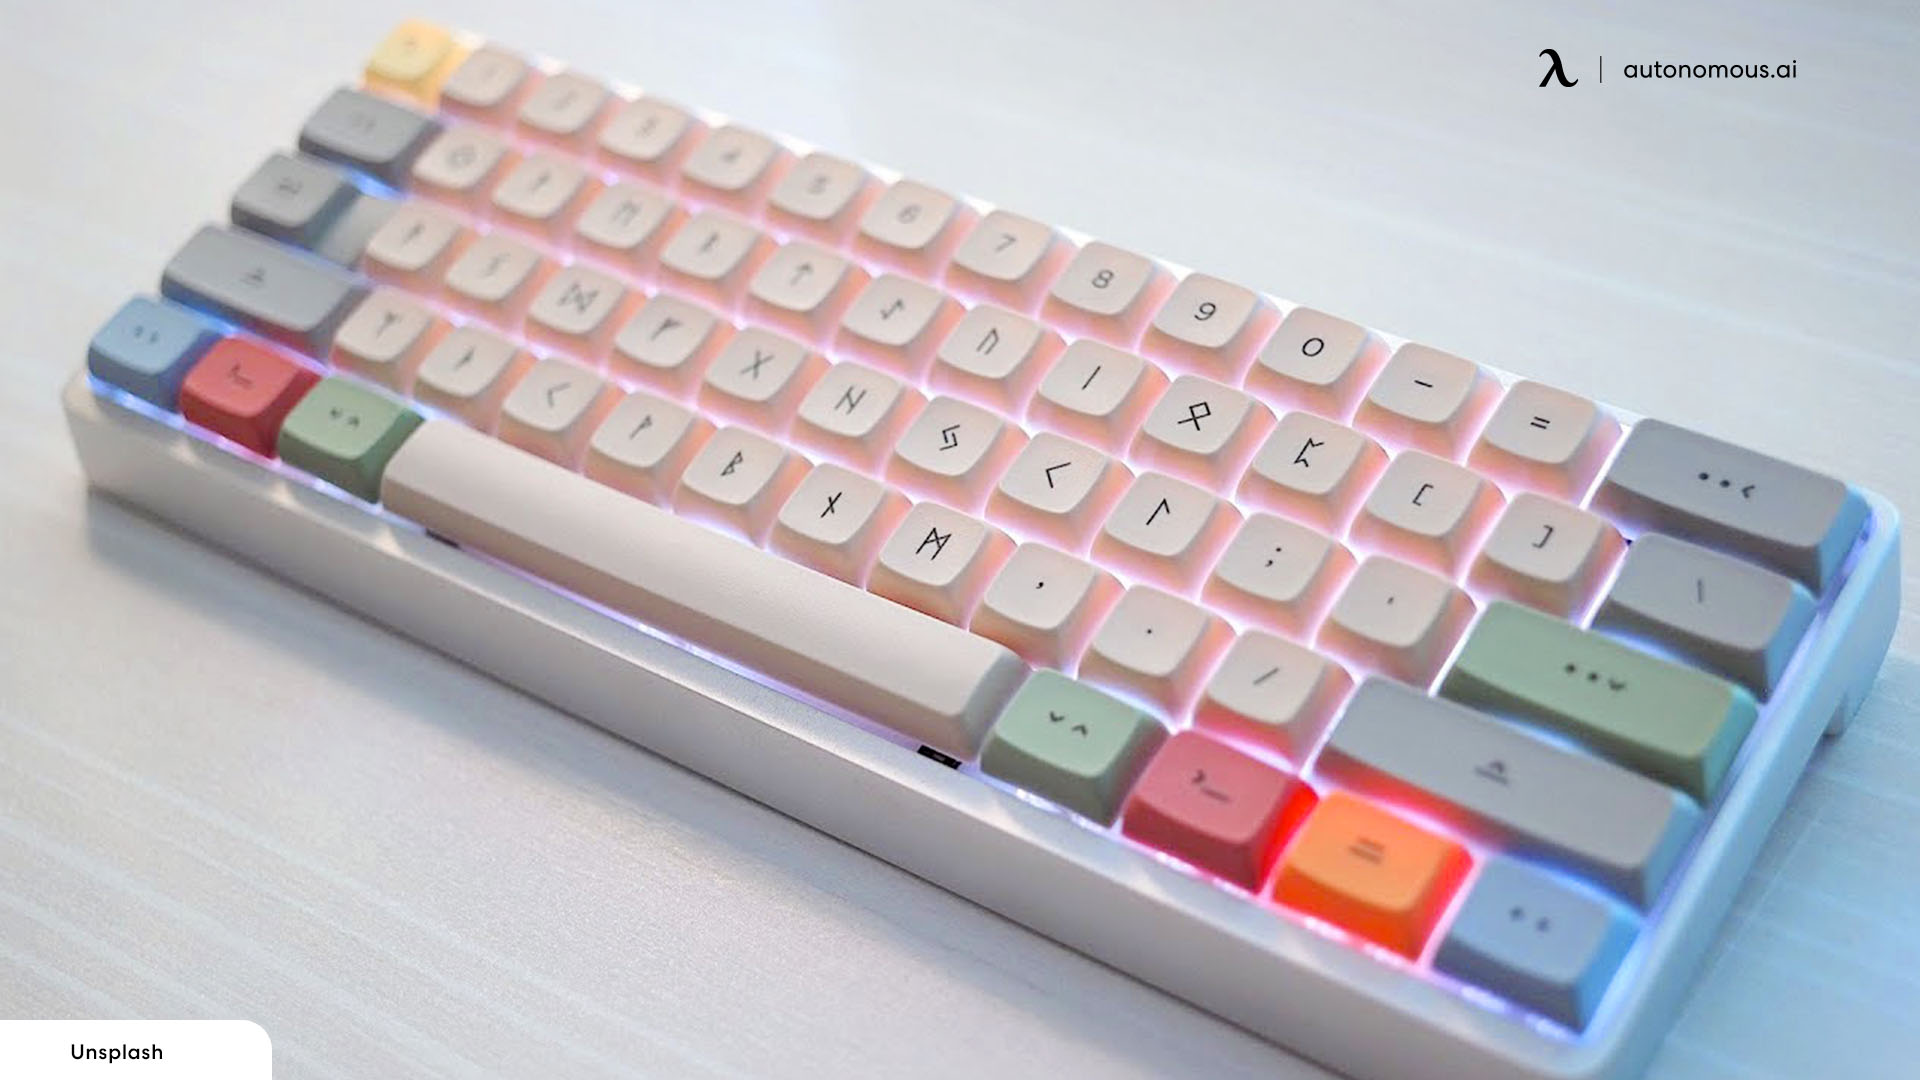 What Is a XDA Keycap?